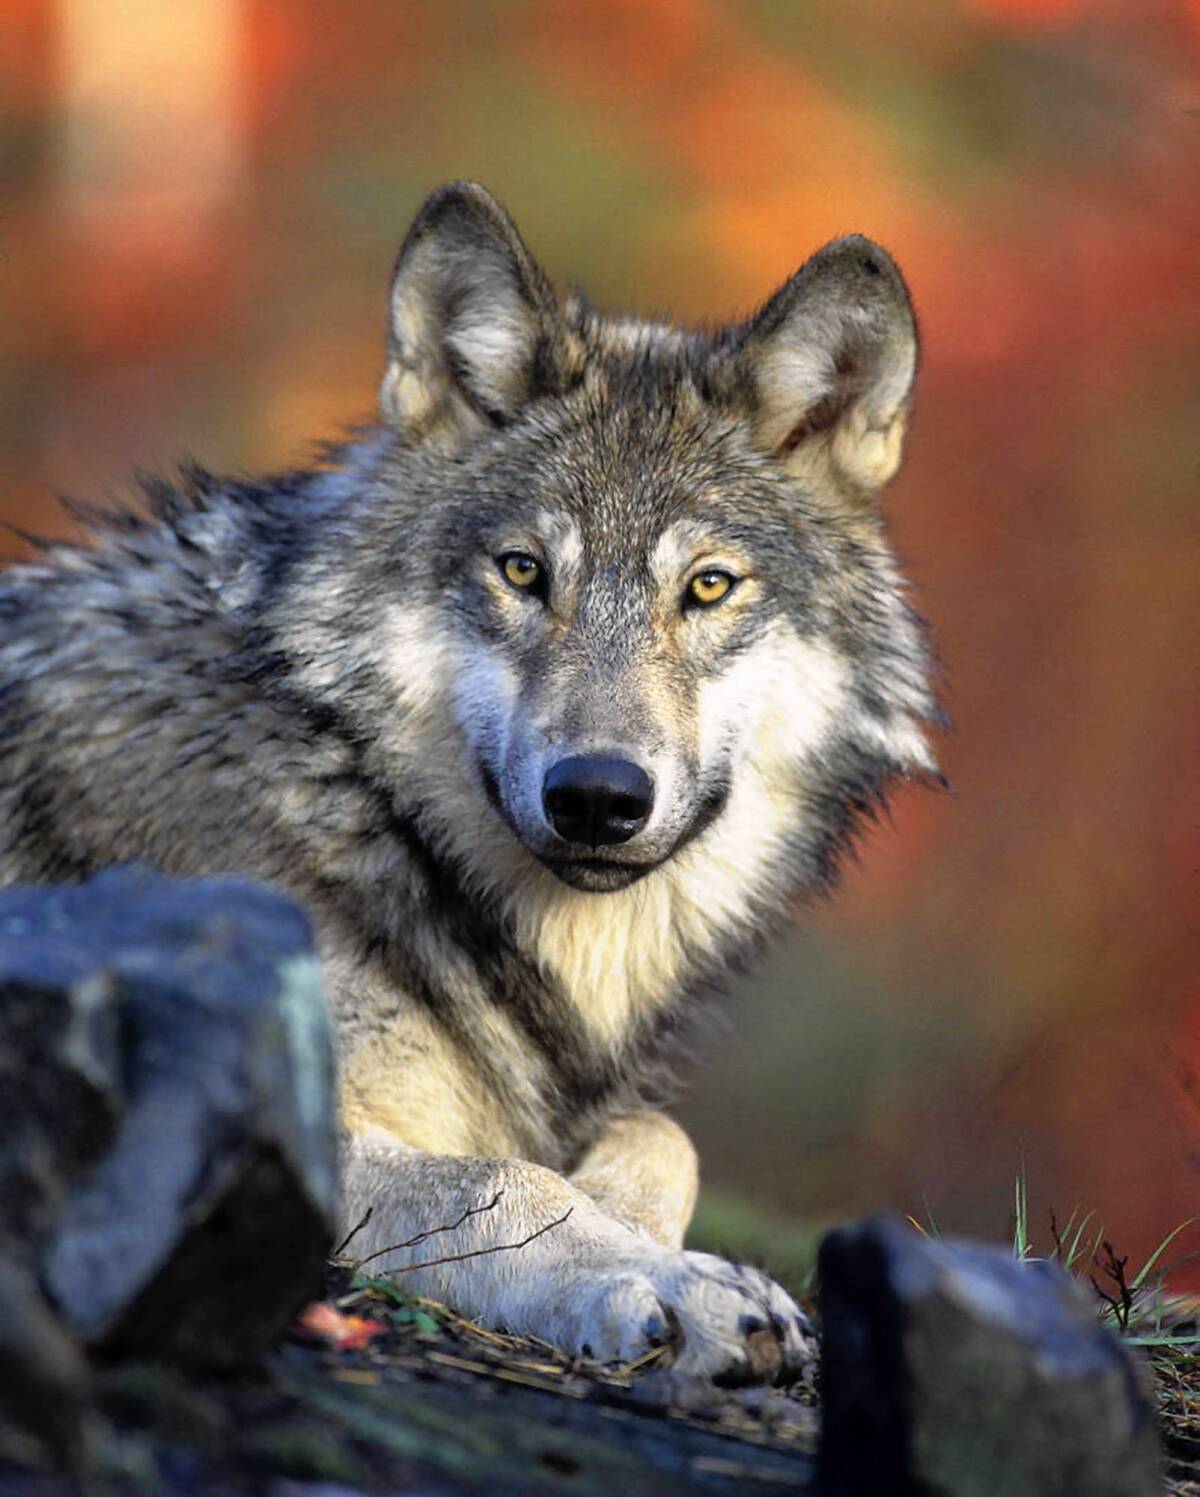 In removing federal protection for gray wolves, the U.S. would leave their management up to individual states.